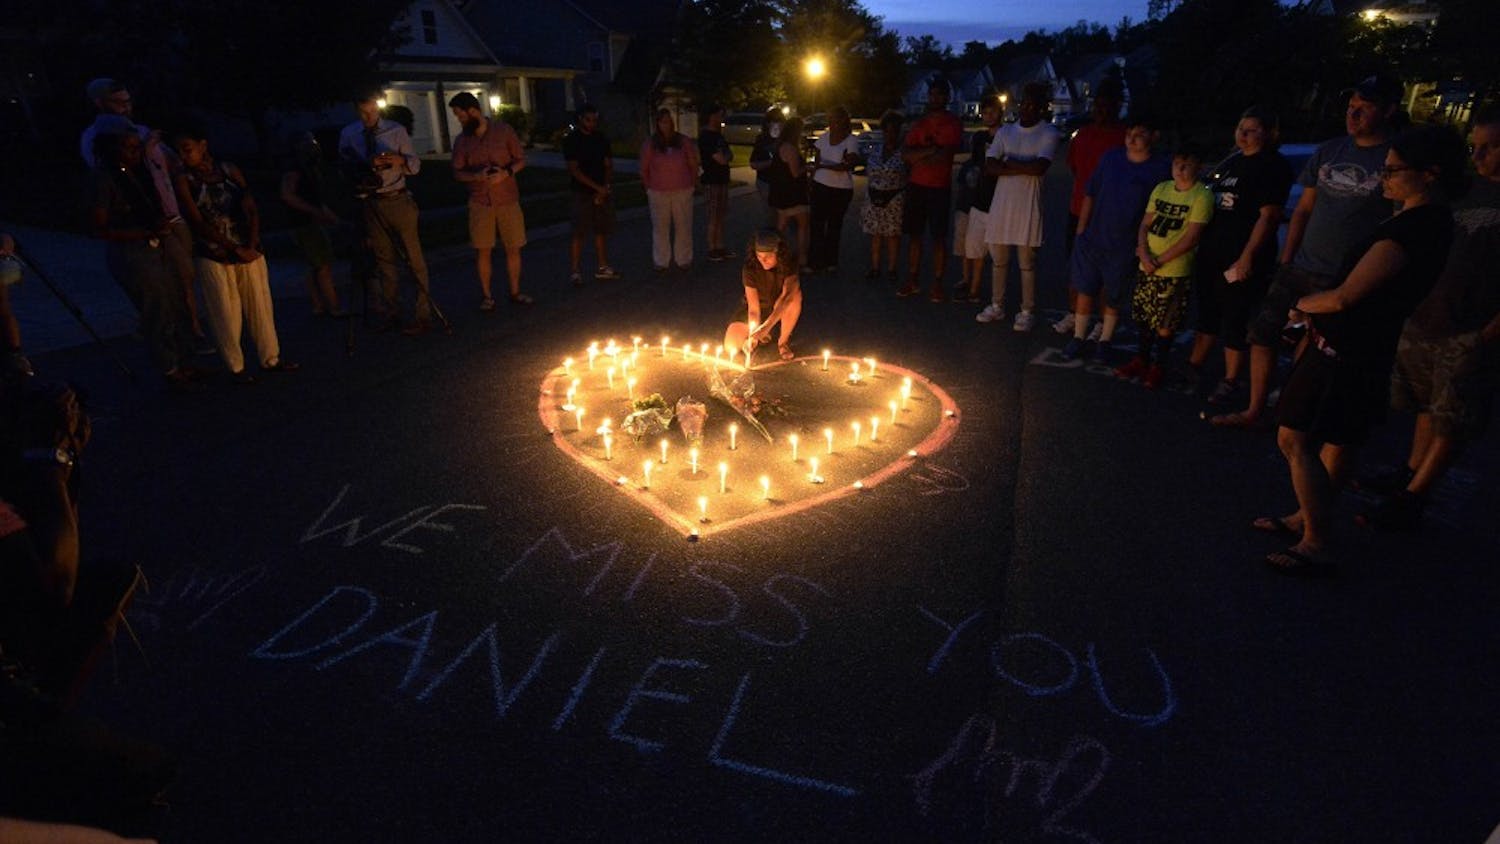 Friends and family of Daniel K. Harris gather around a heart drawn onto Seven Oaks Drive during a candlelight vigil on Monday, Aug. 22, 2016 to remember Harris, a deaf motorist who was shot and killed by a state trooper on Thursday, Aug. 18 in Charlotte, N.C. (David T. Foster III/The Charlotte Observer/TNS) 